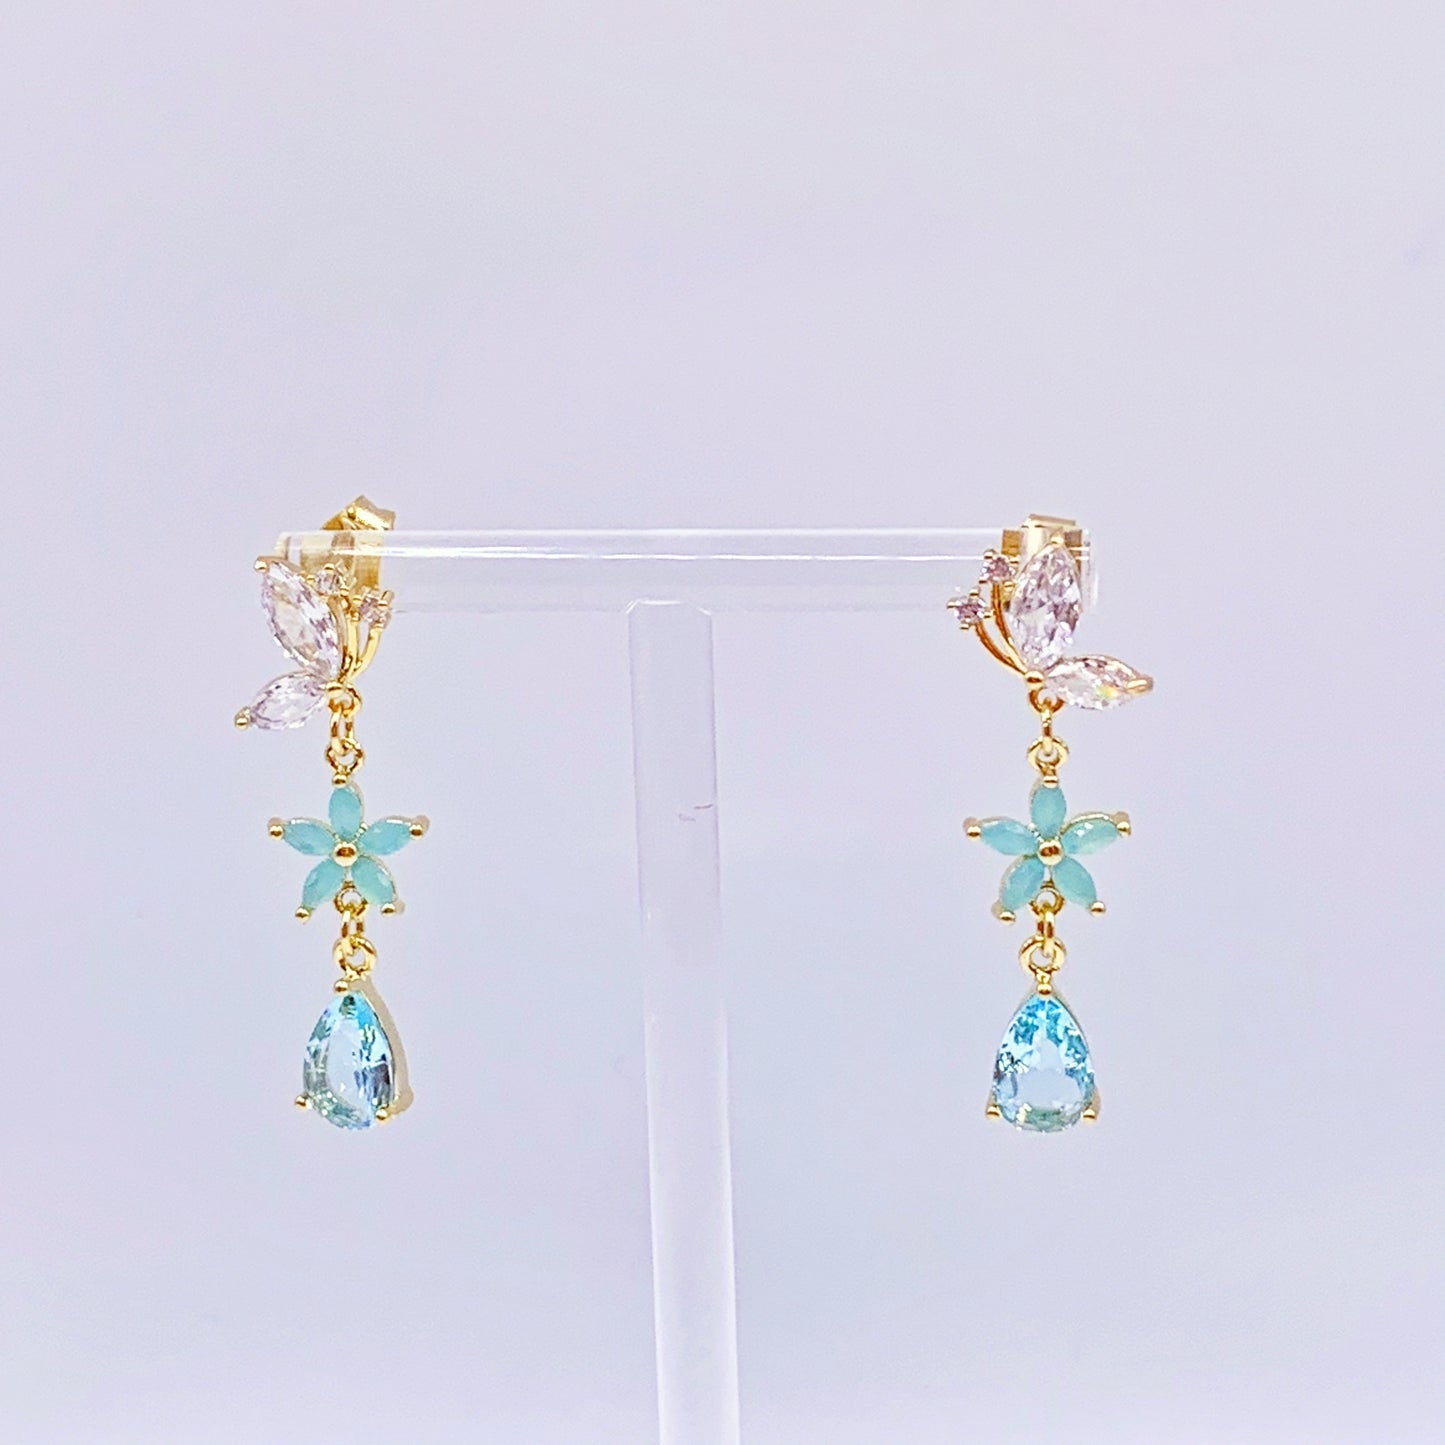 Light Blue Flower With Blue and White Crystal Dangling Earrings